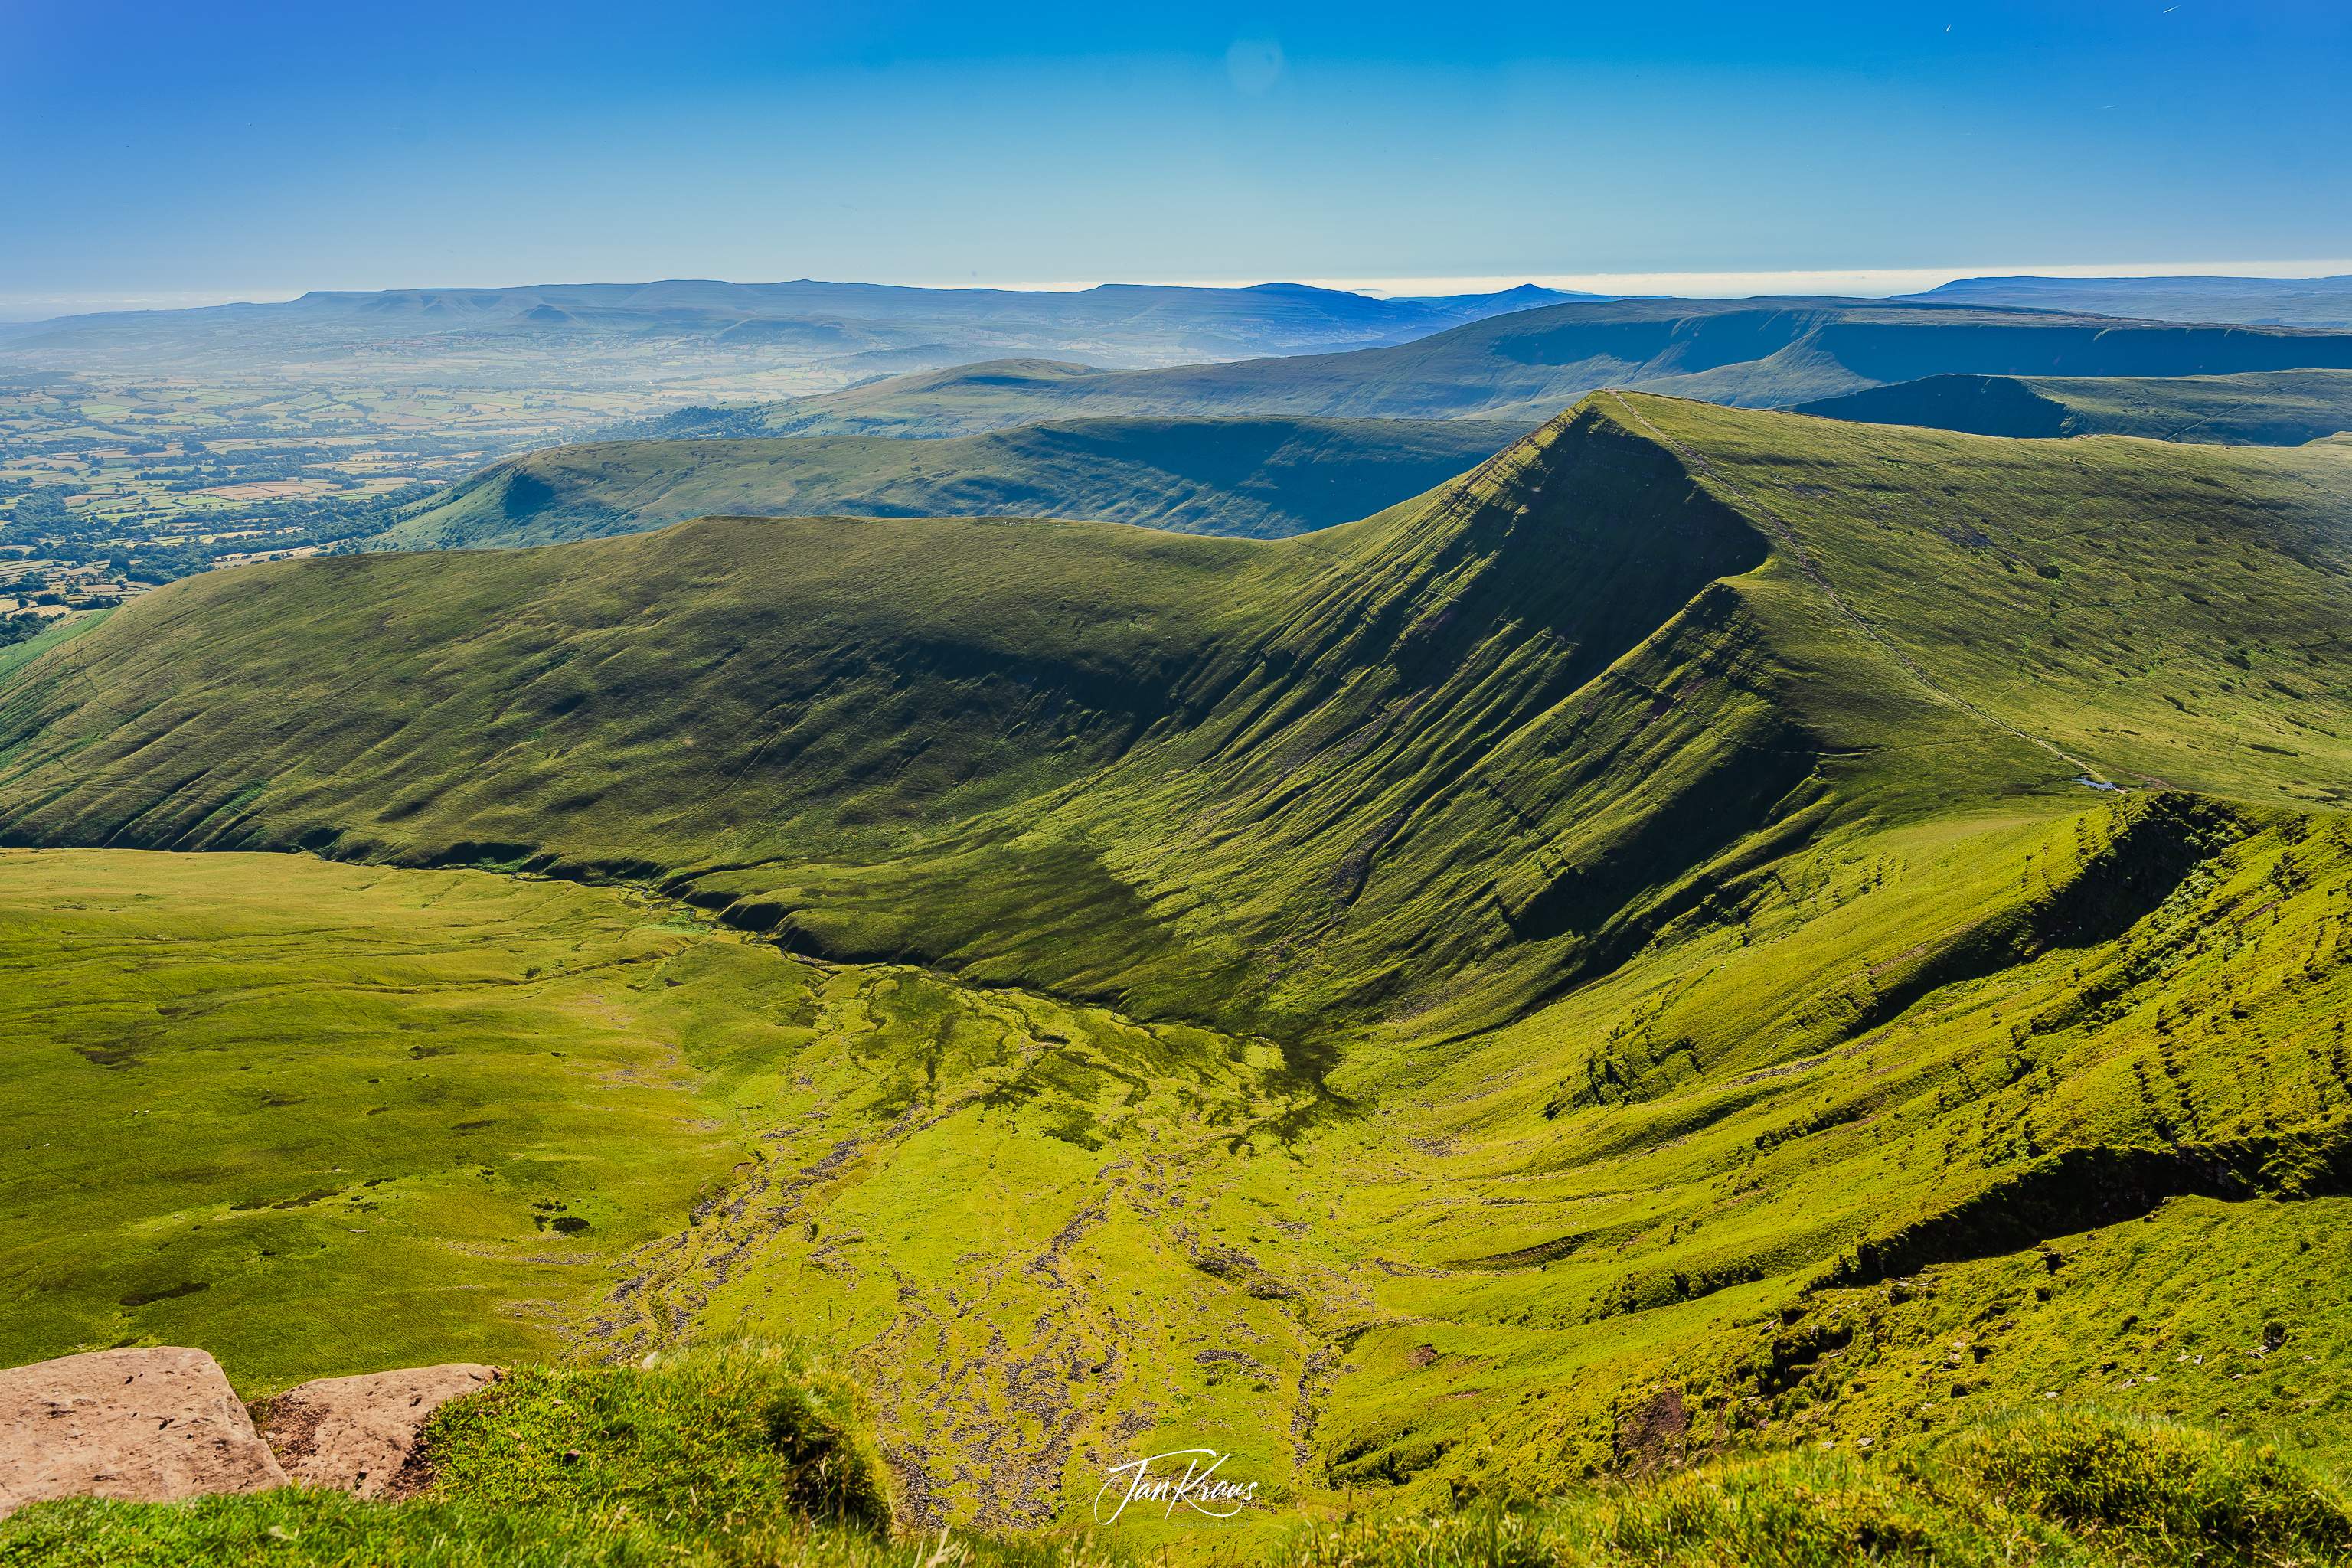 Views from hiking on the Beacons Horseshoe ridge, Brecon Beacons Mountains, Wales, UK